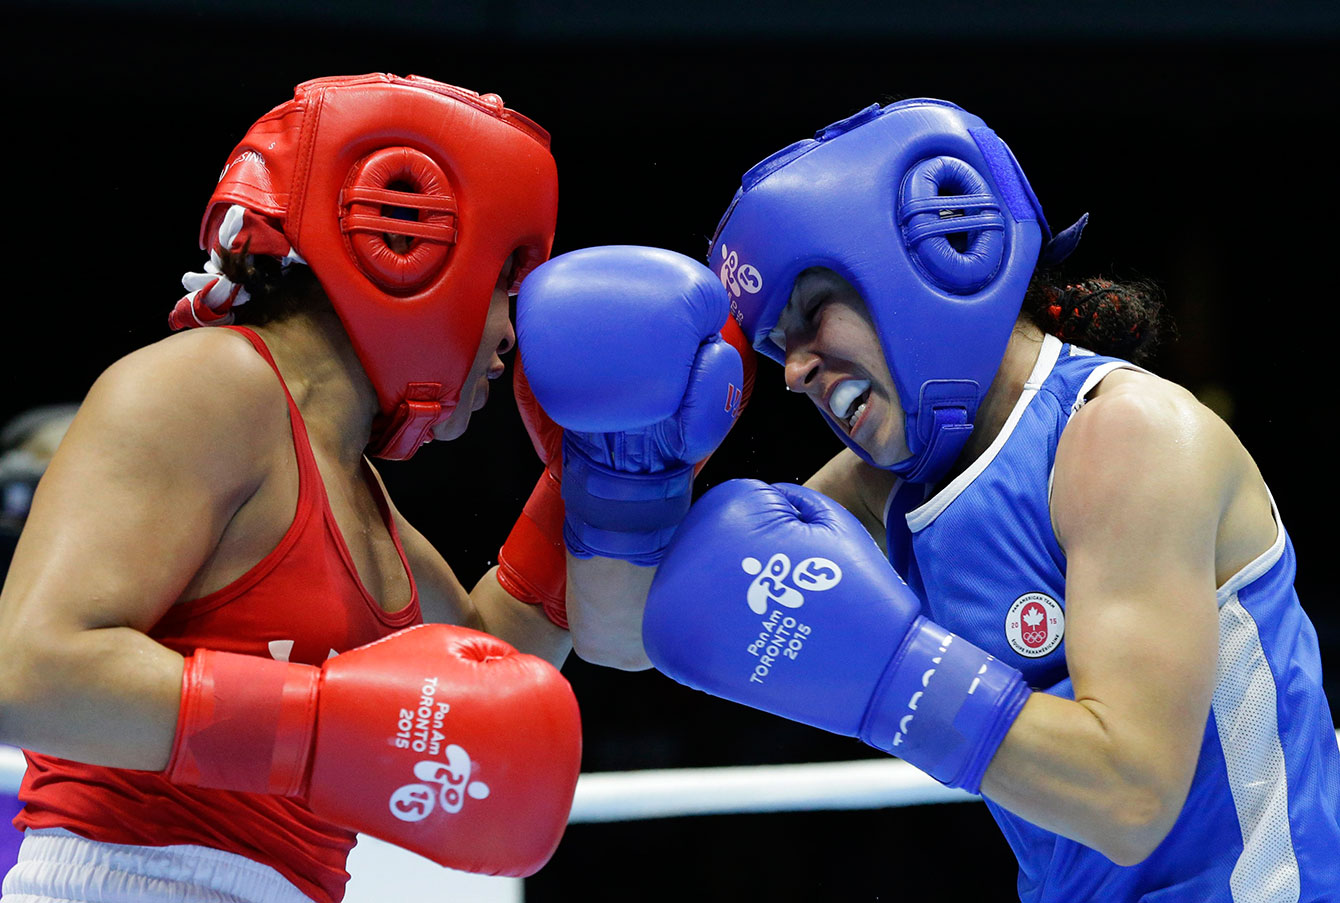 Canada’s Mandy Bujold, right, battles with Marlin Esparza of the U.S. in their women’s flyweight boxing final at the Pan Am Games in Oshawa, Ontario Saturday, July 25, 2015. Bujold defeated Esparza to claim the gold.